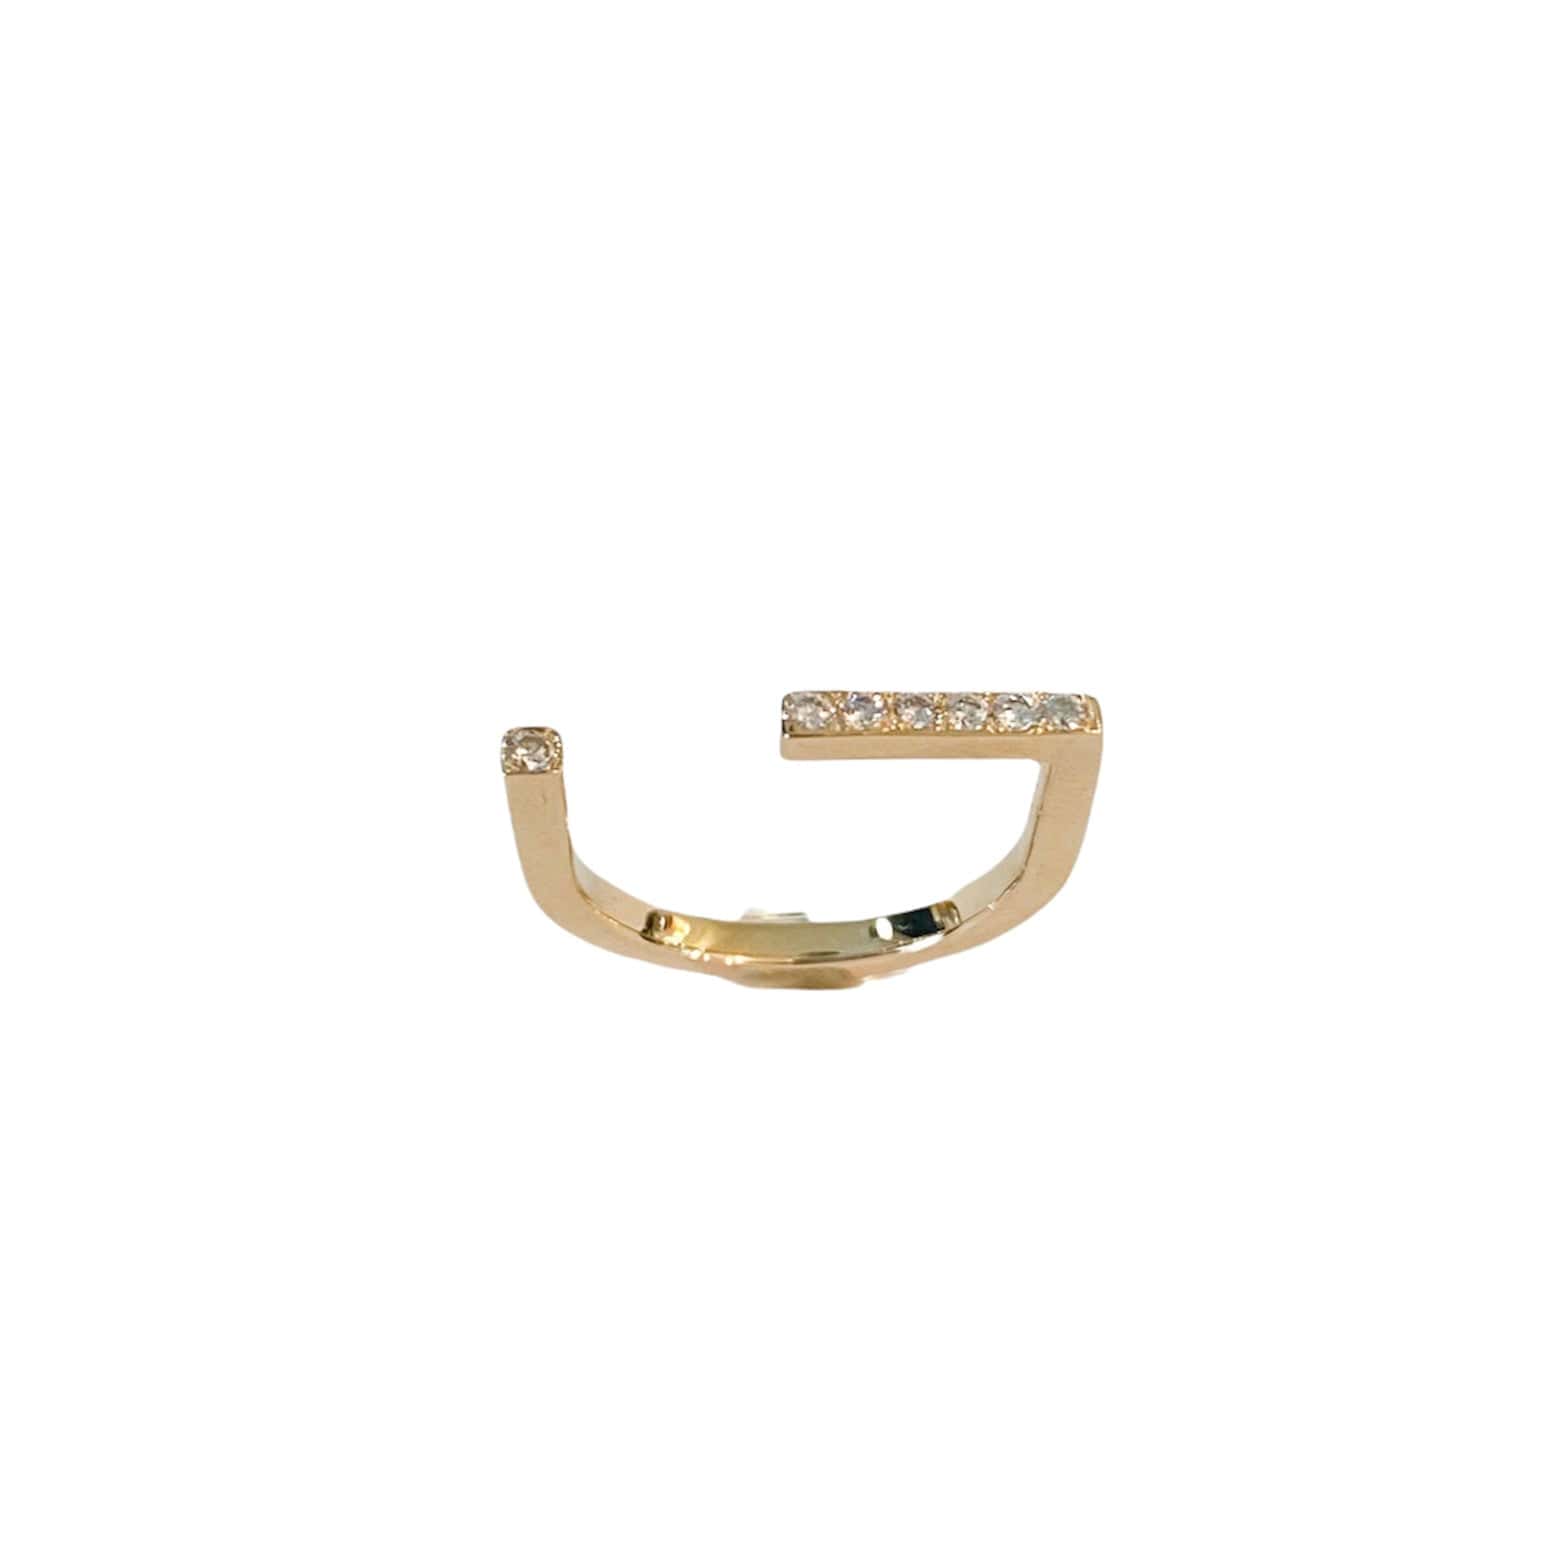 Rainbow 14 kt gold pave diamond ring, side view.